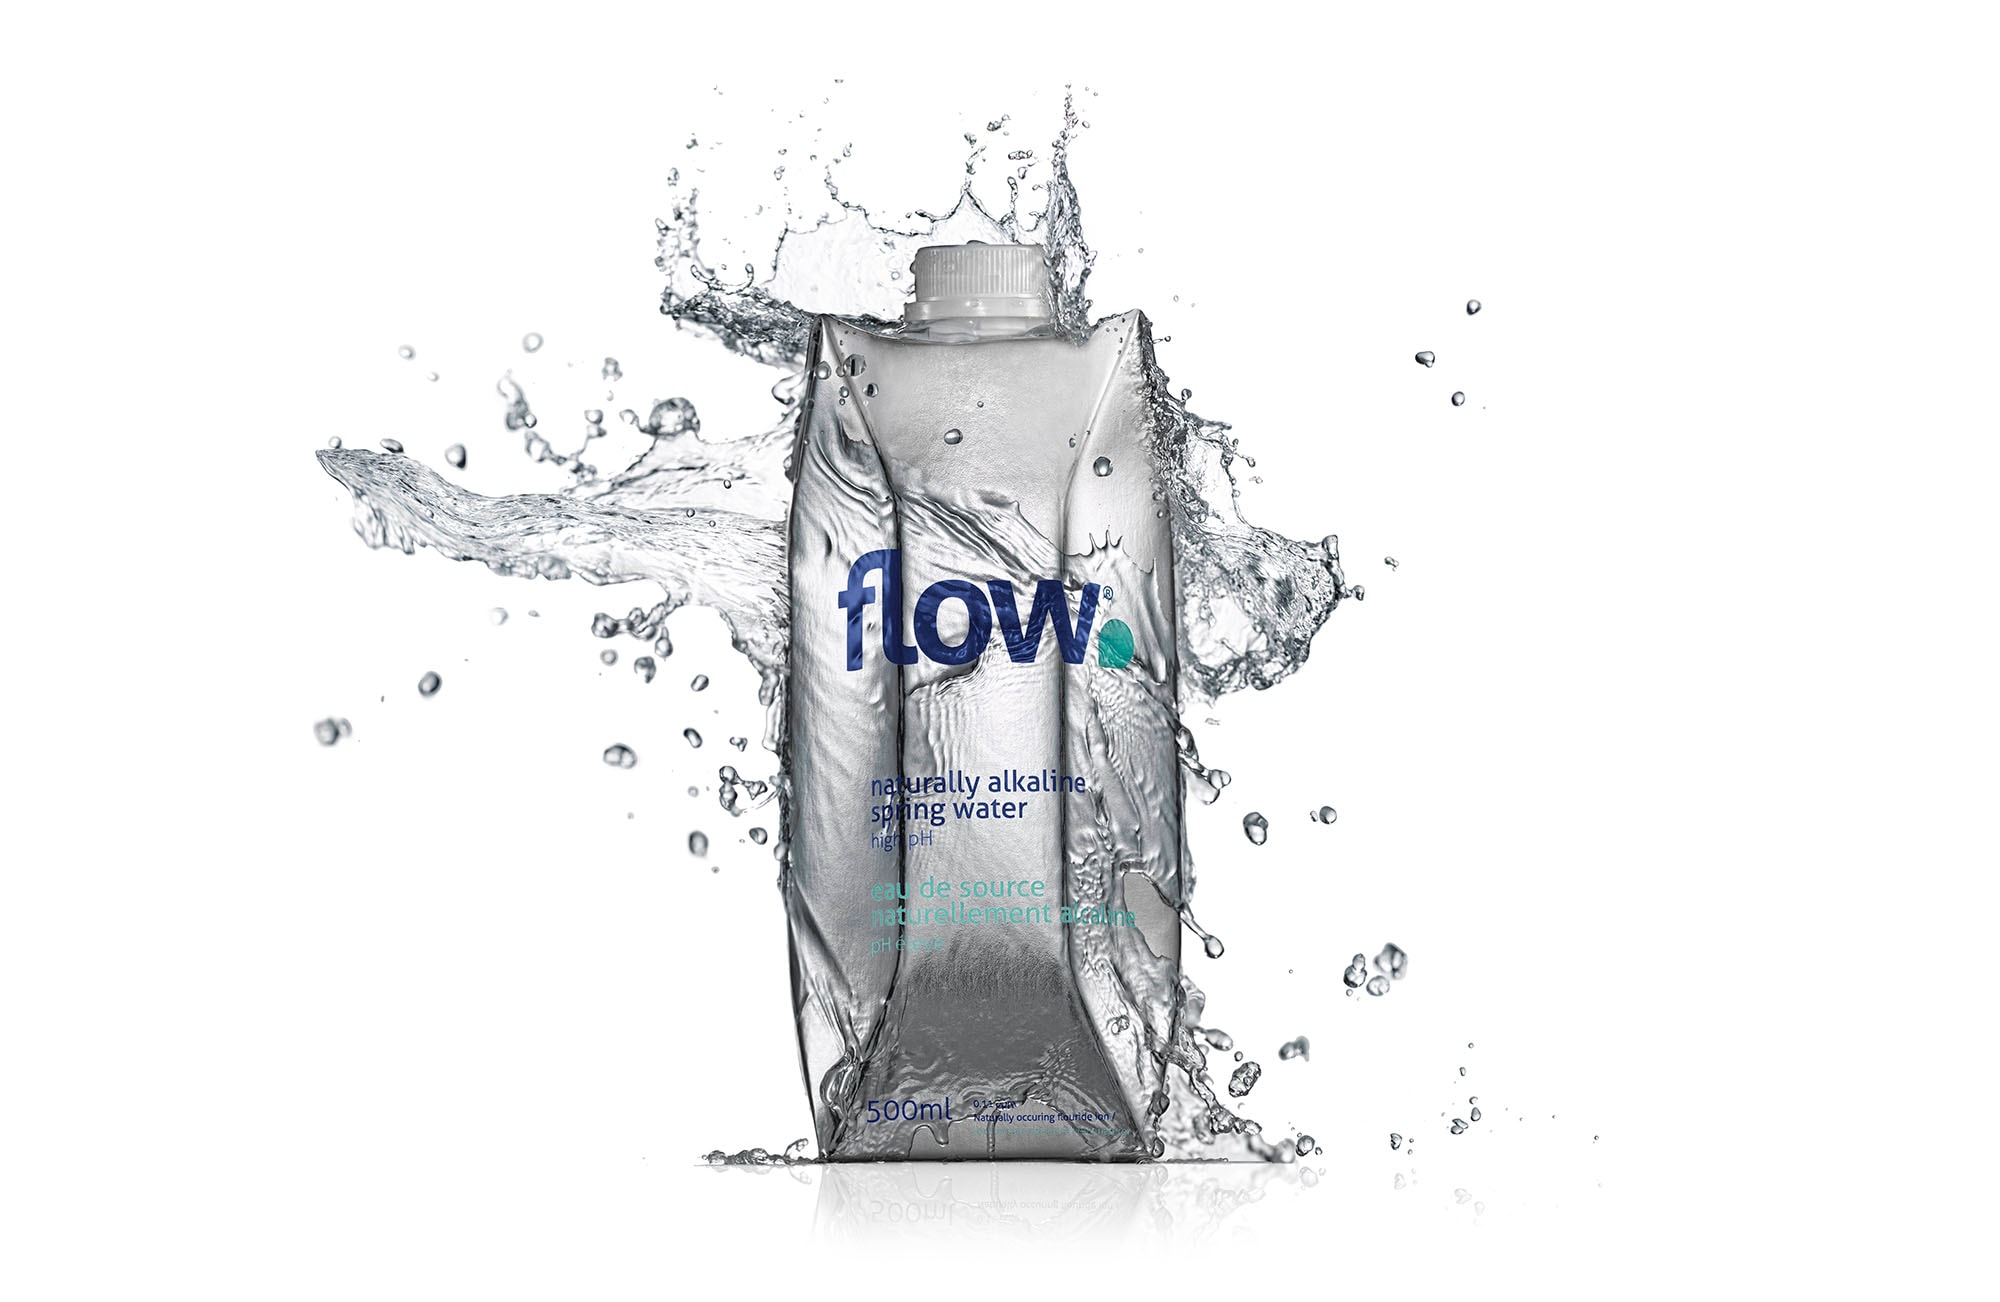 Flow water is nurtured for thousands of years in a deep,